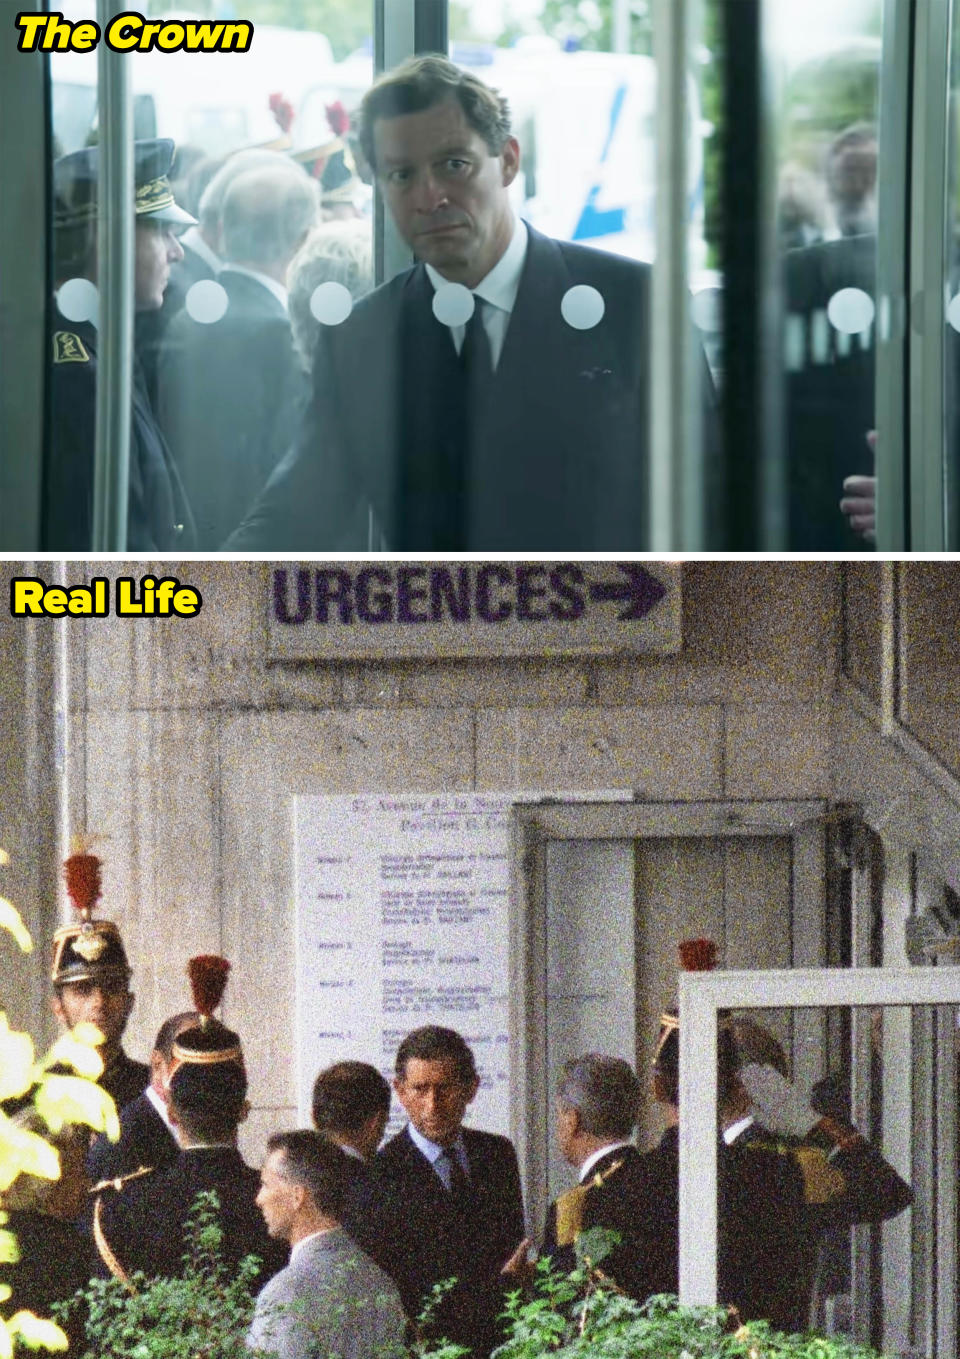 Side-by-sides of Prince Charles entering the hospital